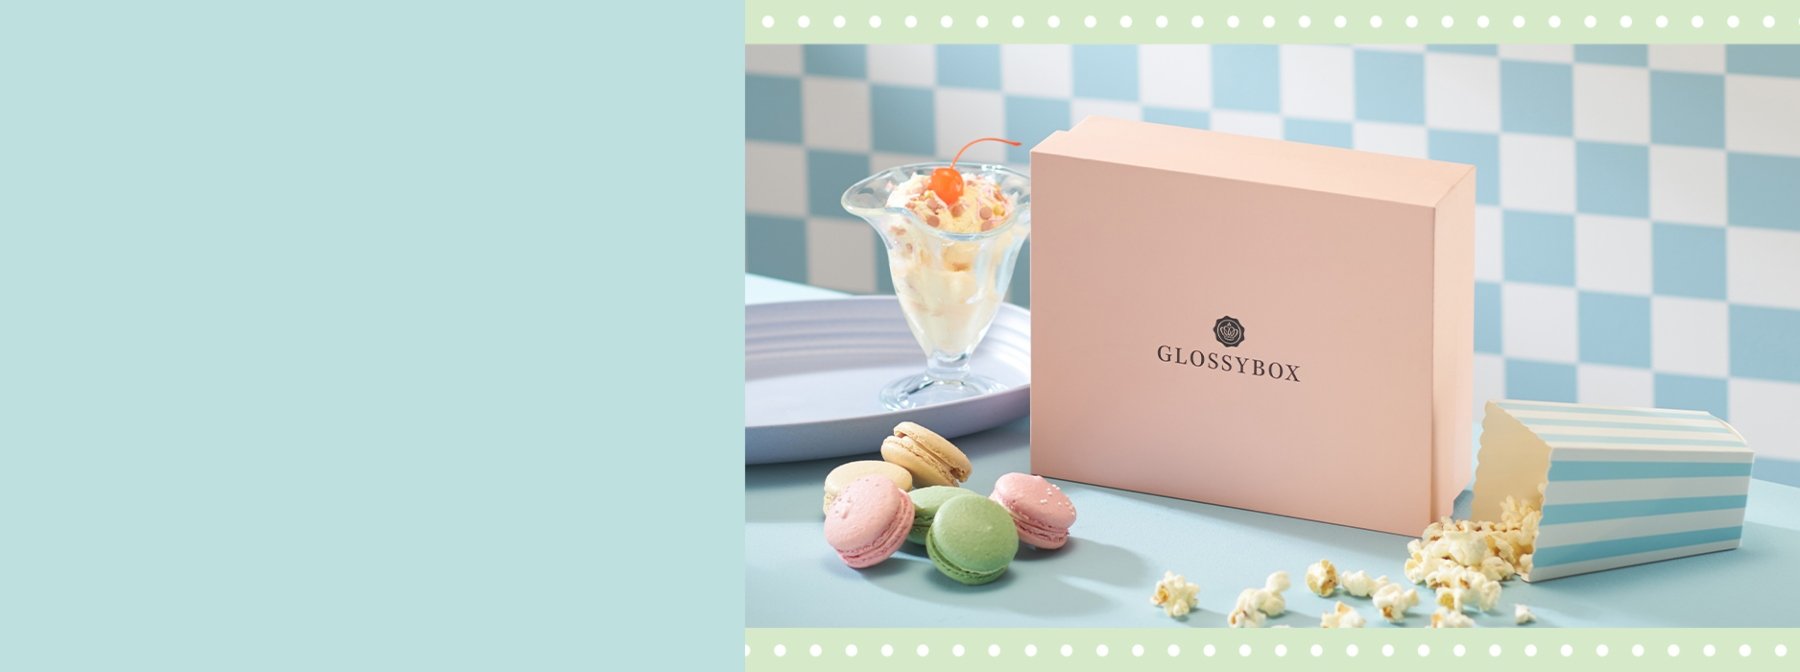 Pretty Pleasures: The Story of Our March GLOSSYBOX